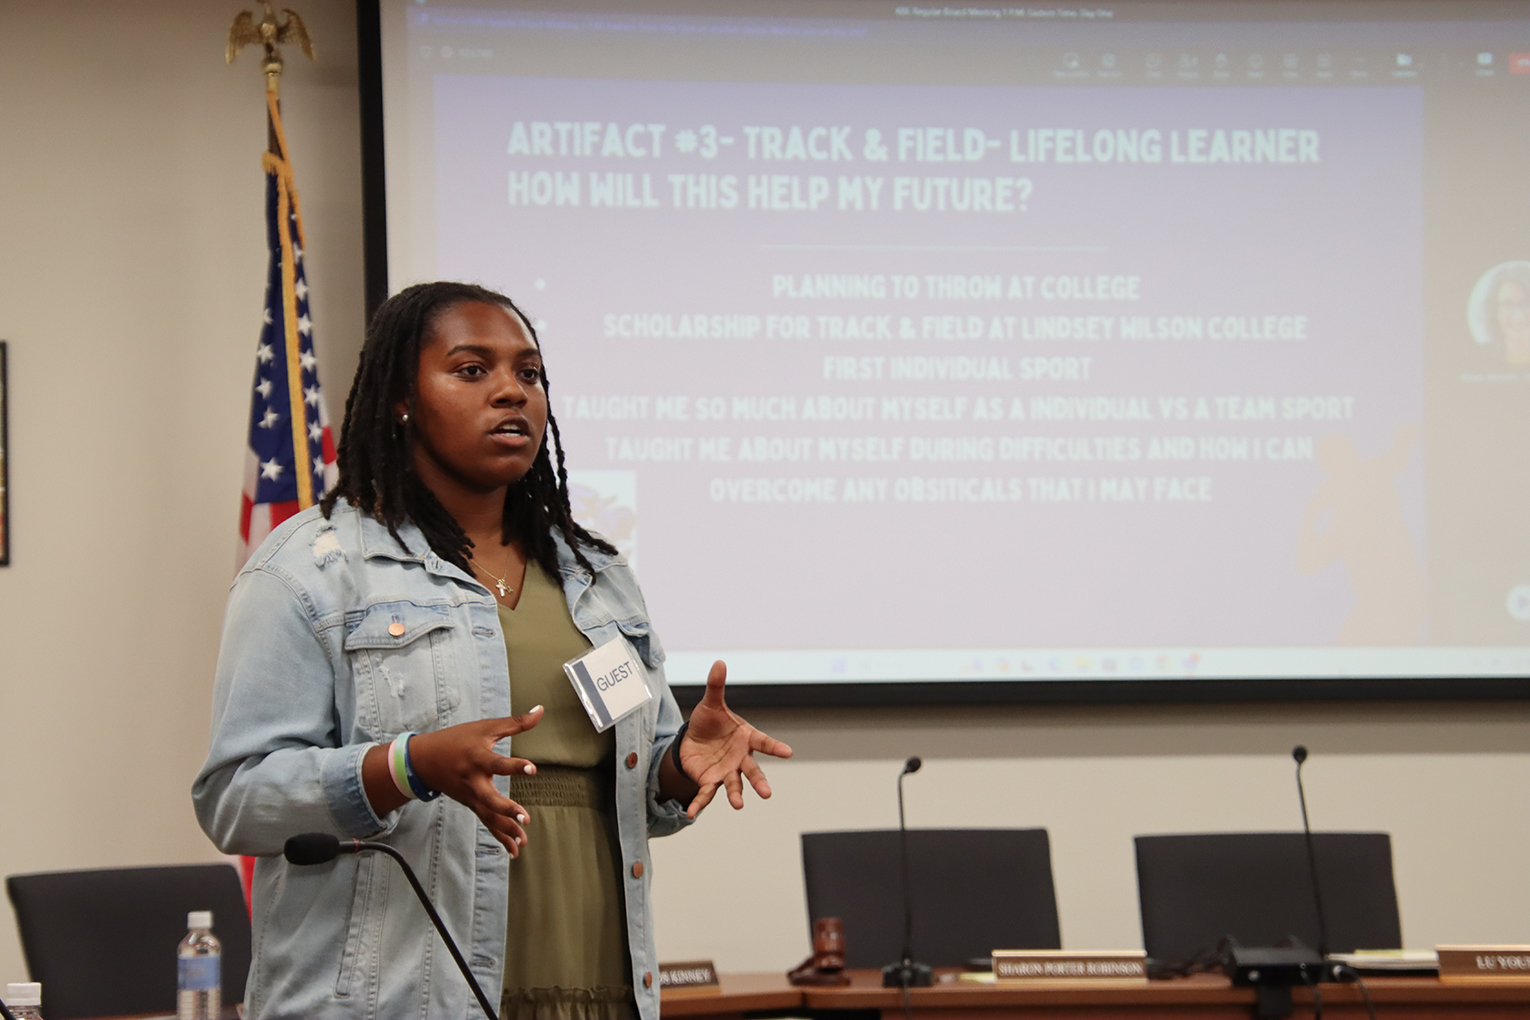 Navaeh Acklin talking in a board room with her presentation showing on a screen behind her, reading Artifact #3, Track and Field, Lifelong Learner. How will this help my future?